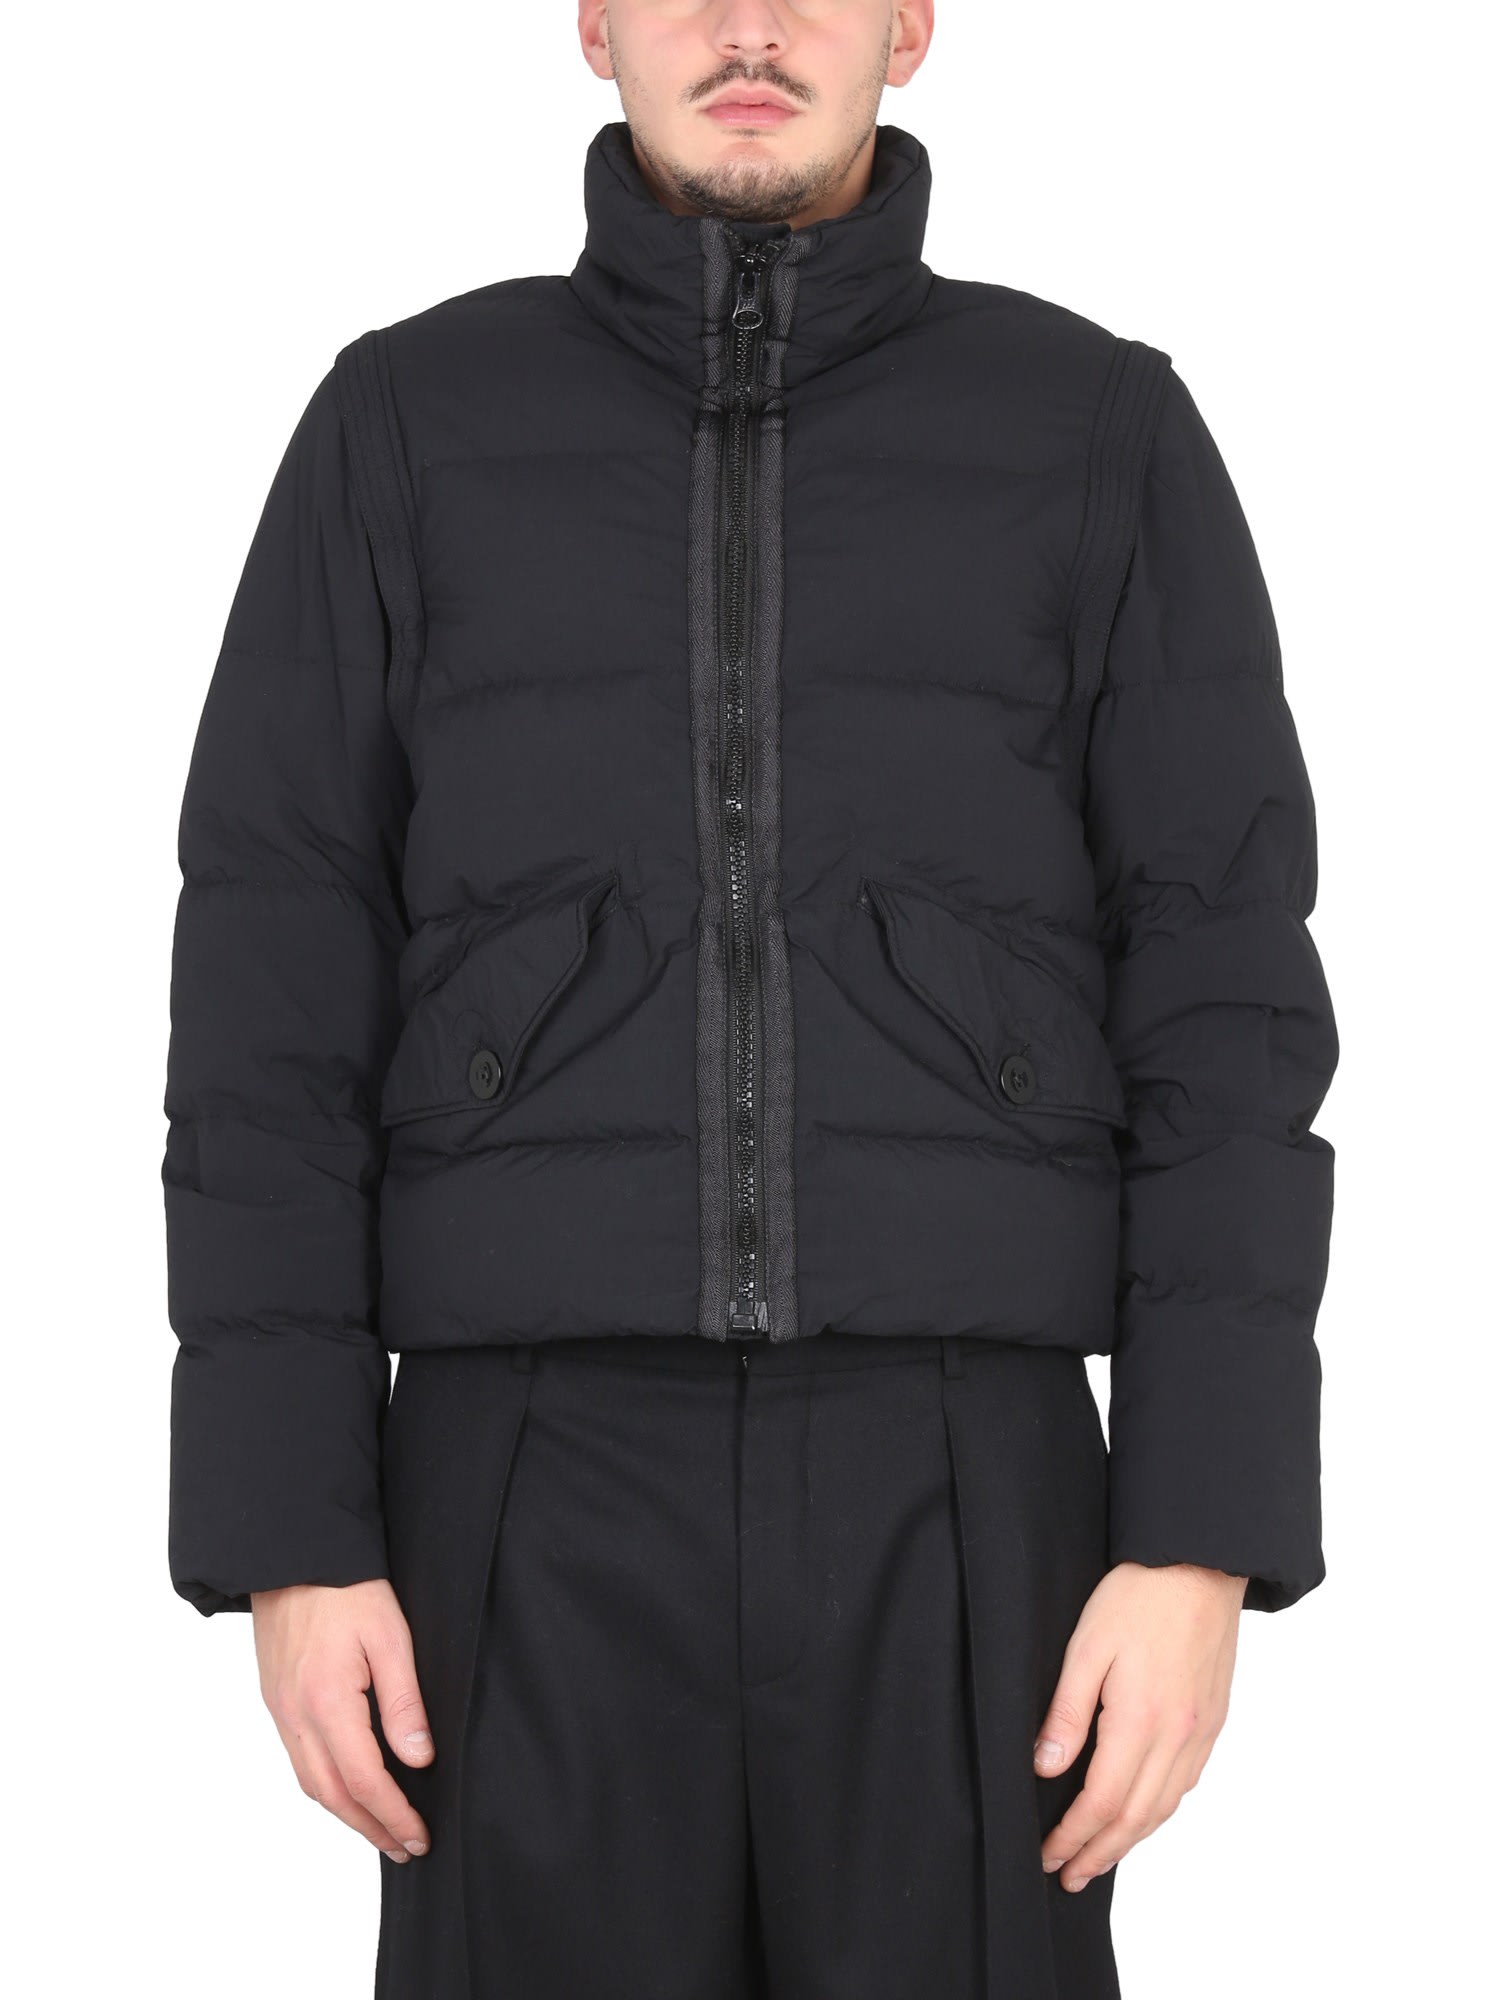 TEN C DOWN JACKET WITH REMOVABLE SLEEVES